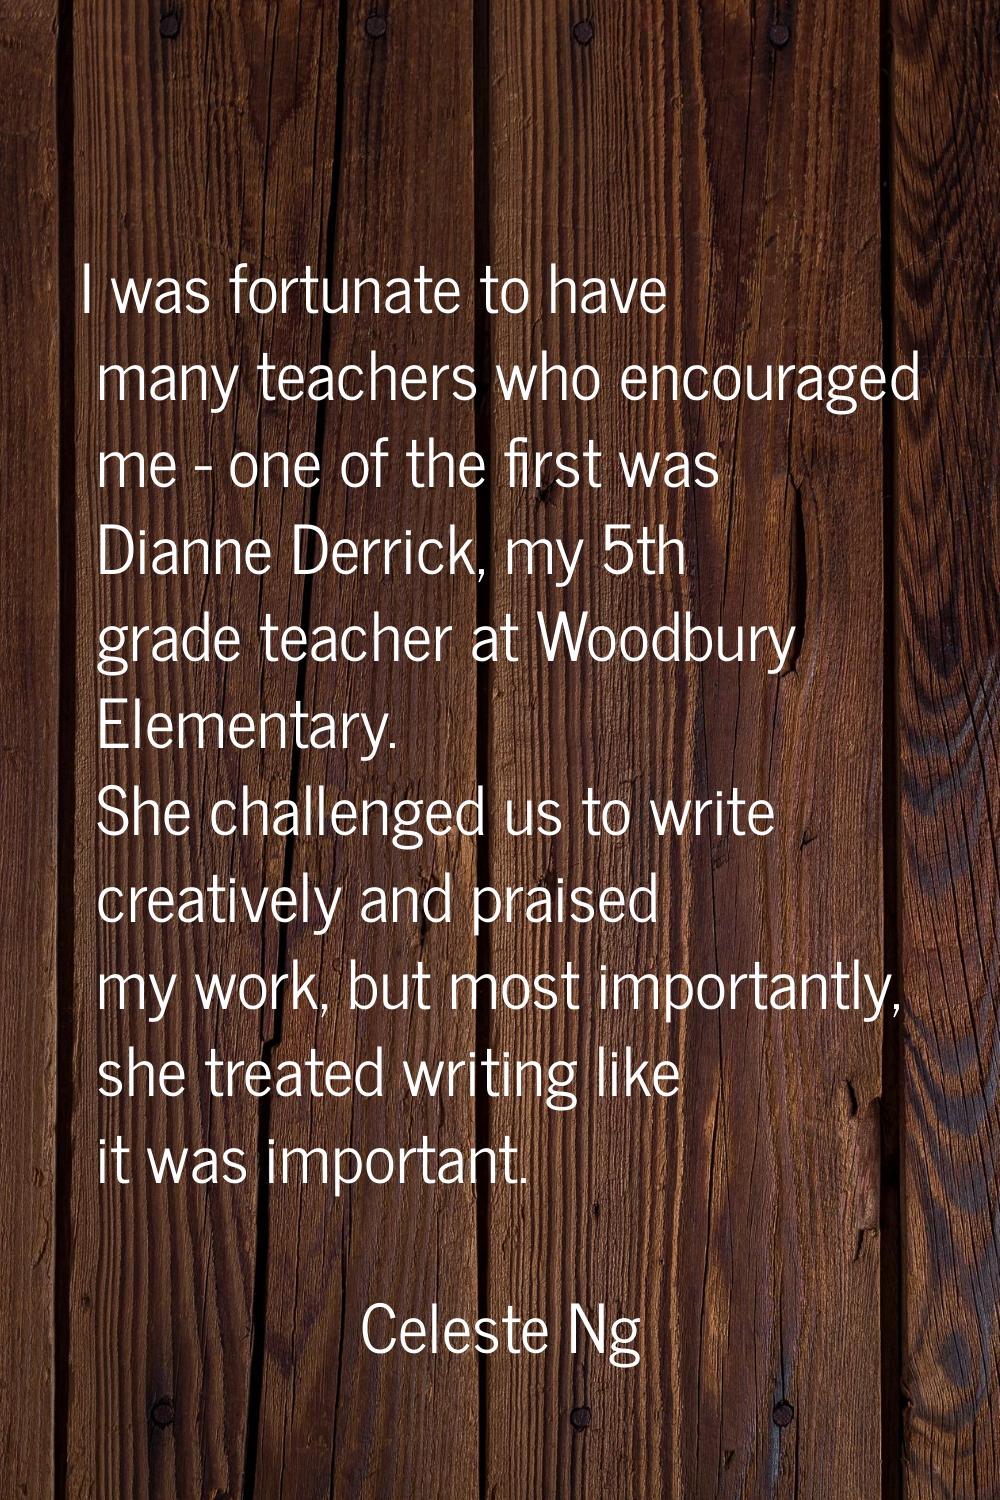 I was fortunate to have many teachers who encouraged me - one of the first was Dianne Derrick, my 5